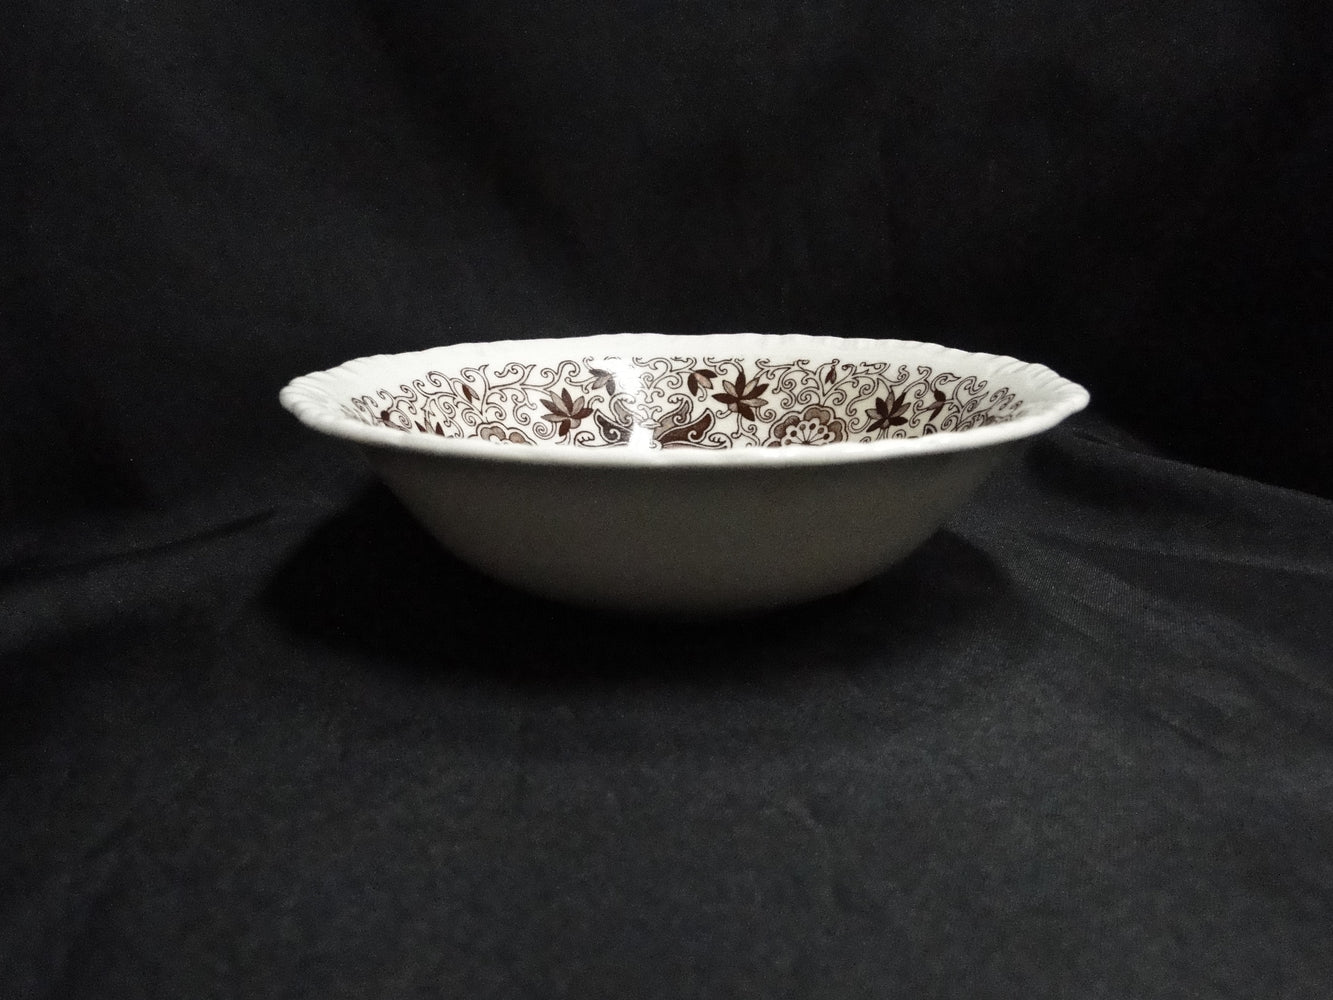 Mason's Bow Bells Brown, Flowers & Scrolls: Cereal Bowl (s), 6 1/4", Crazing